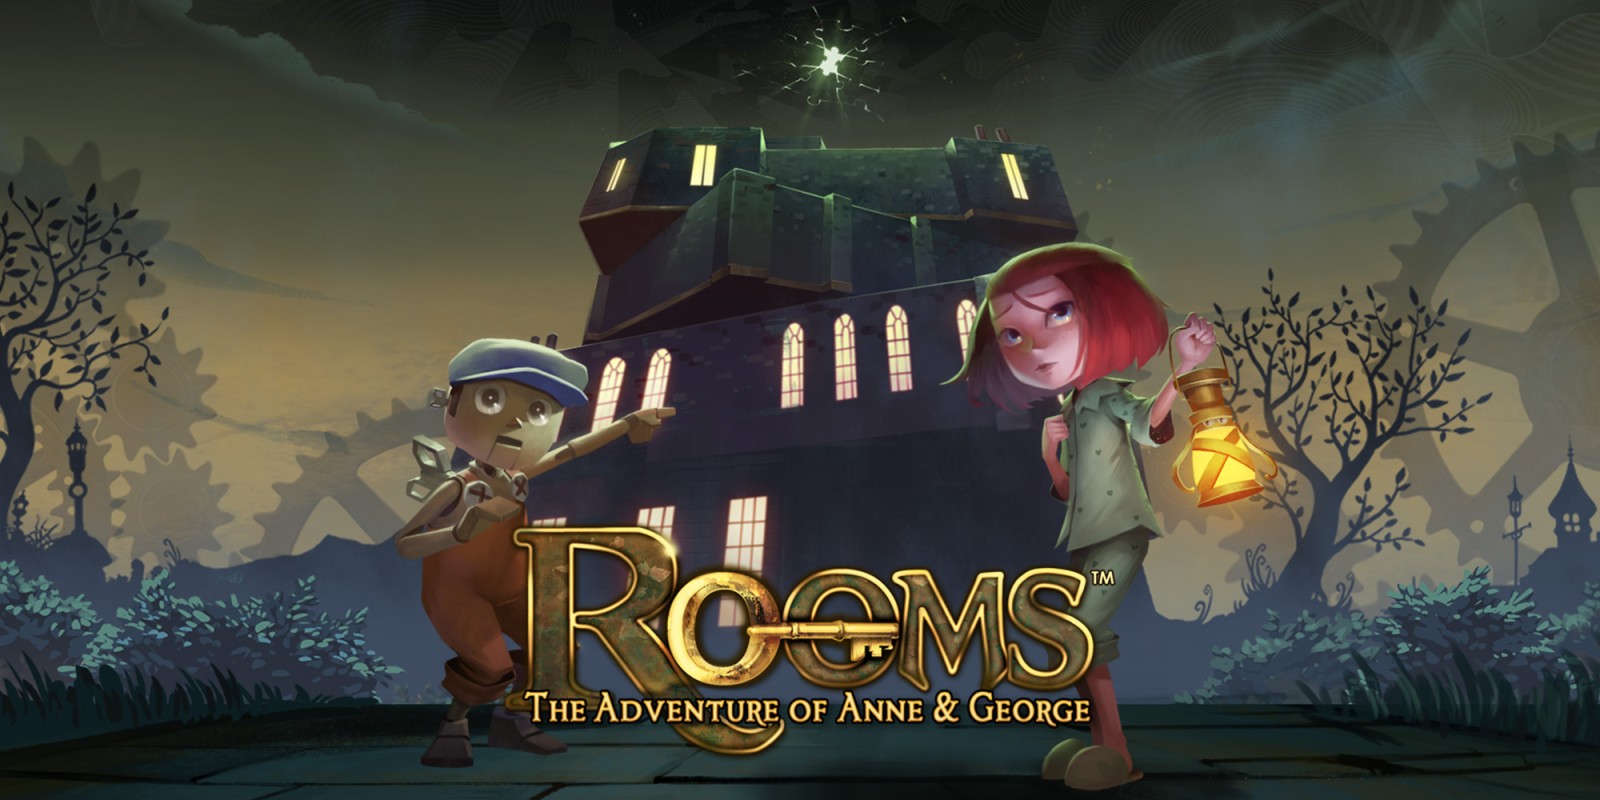 Rooms: The Adventure of Anne & George